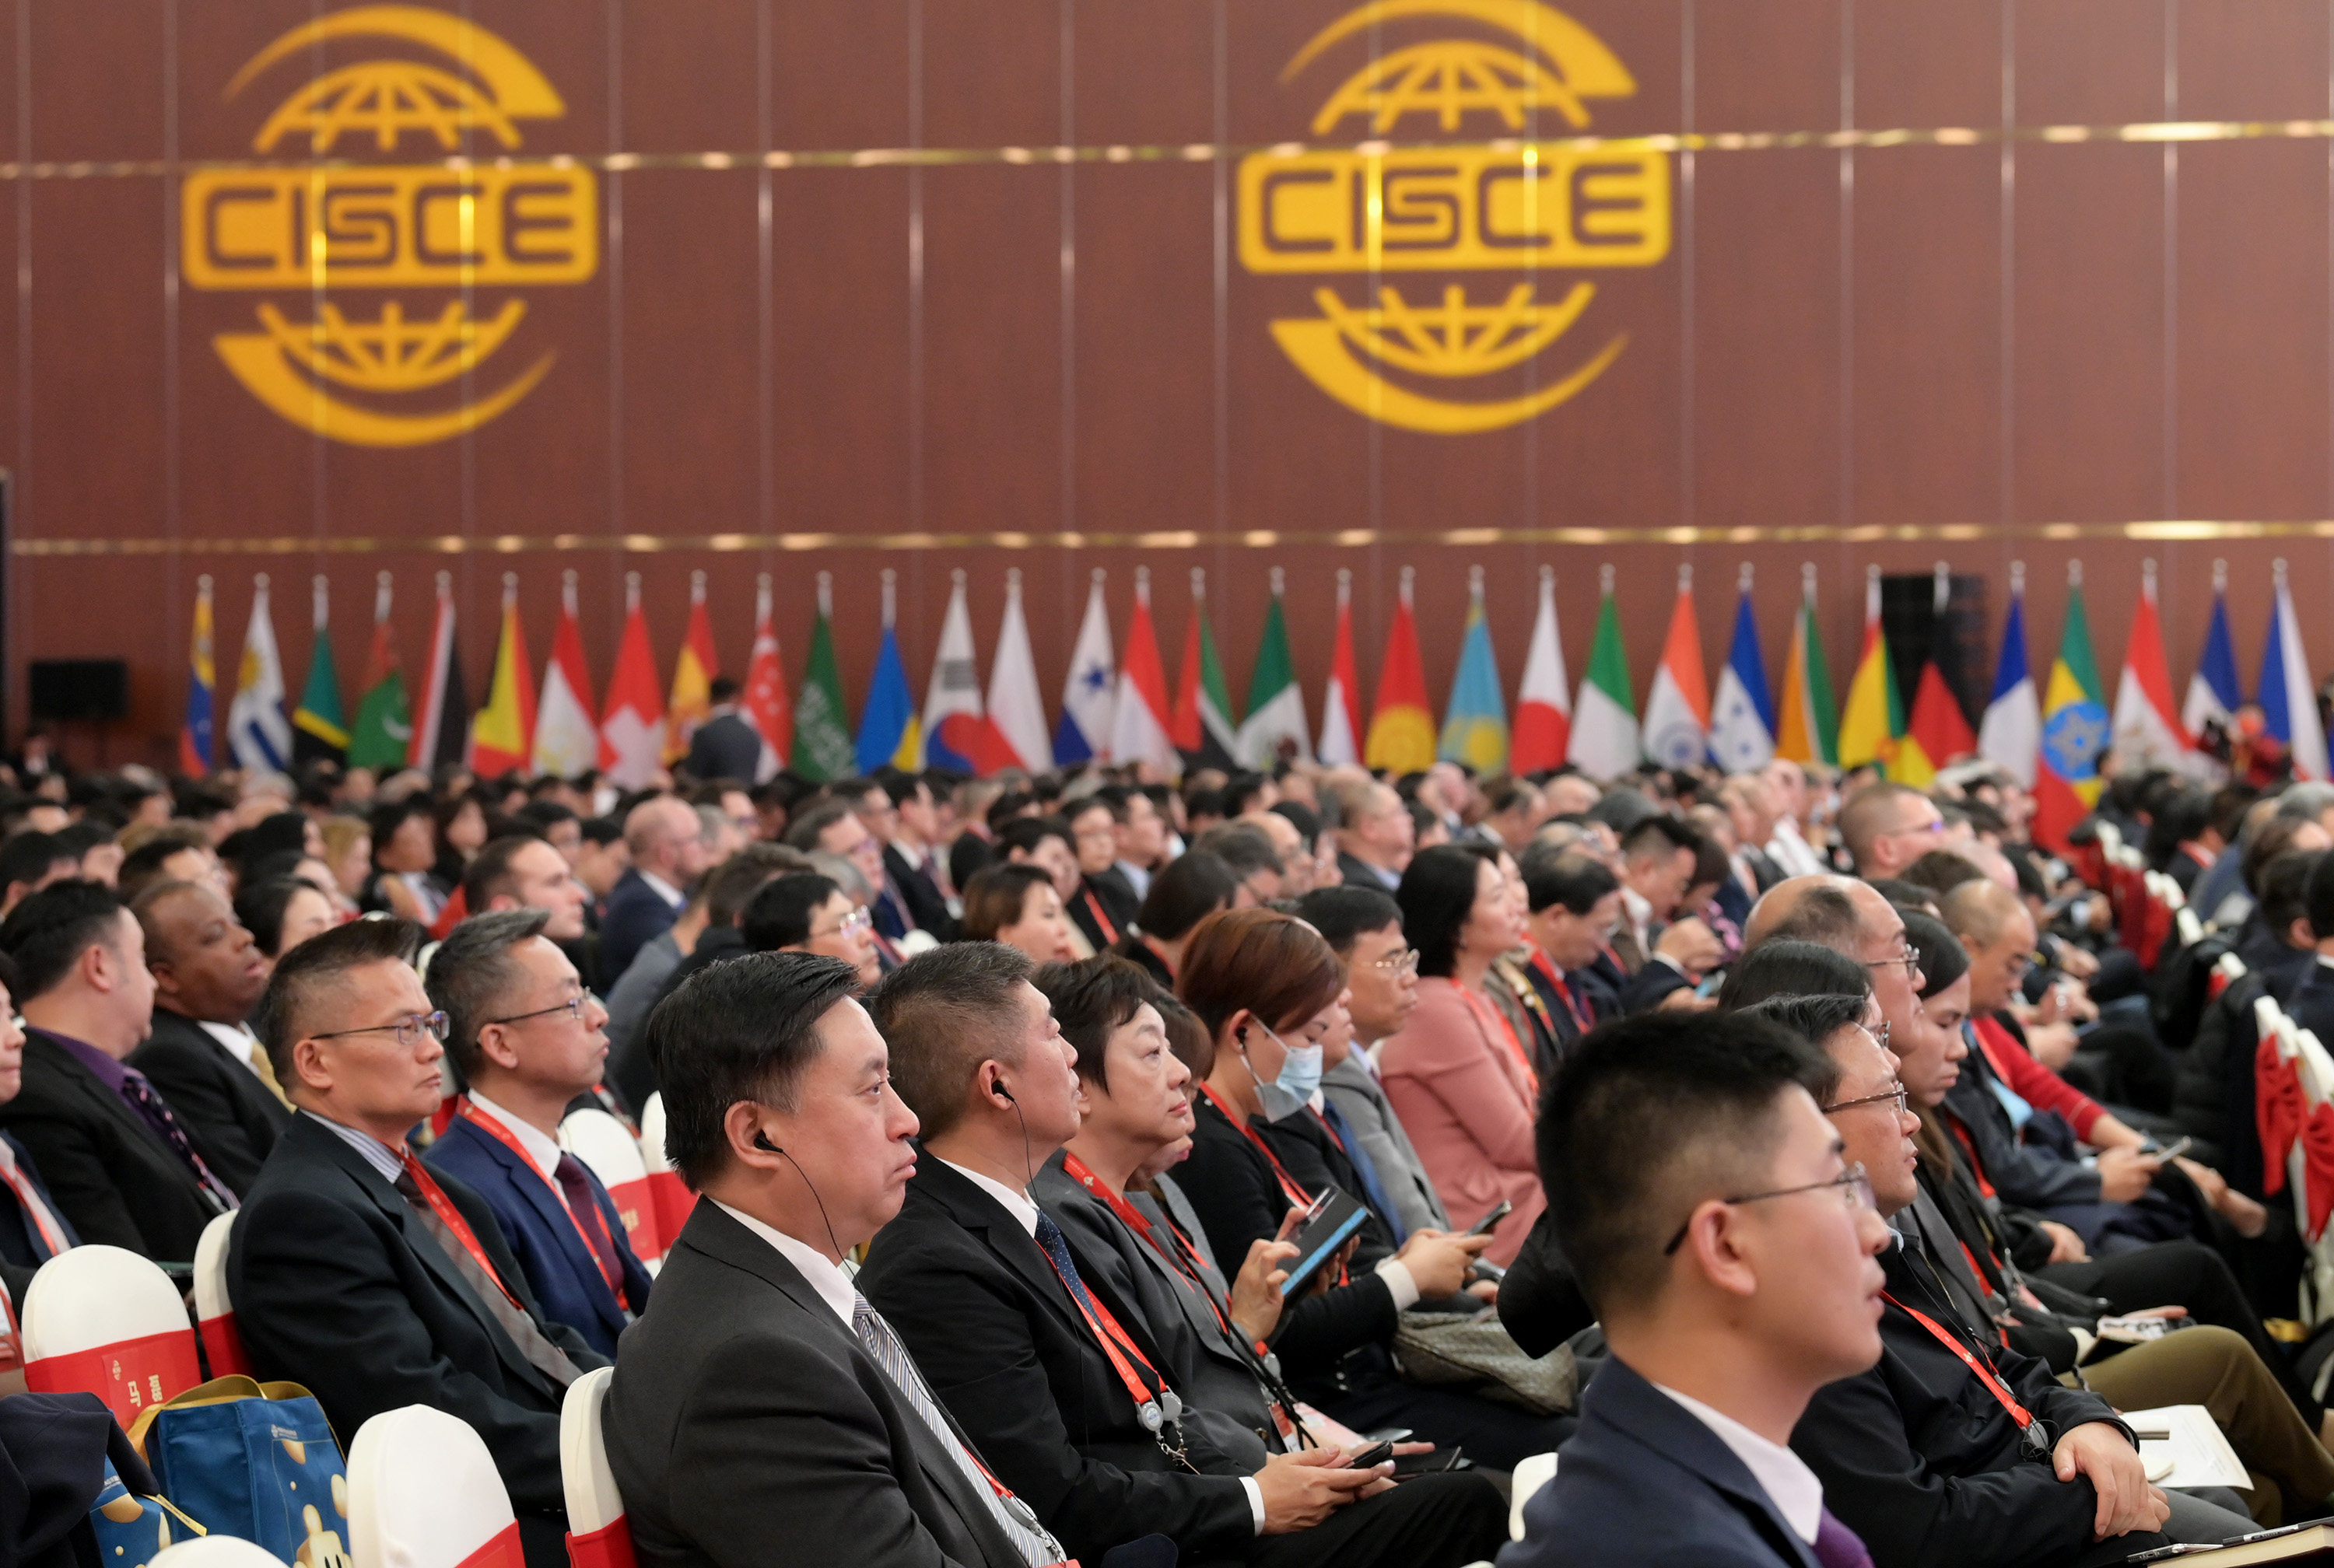 Forum participants at China’s first International Supply Chain Expo emphasised the importance of tech in keeping manufacturing linkages secure. Photo: Xinua